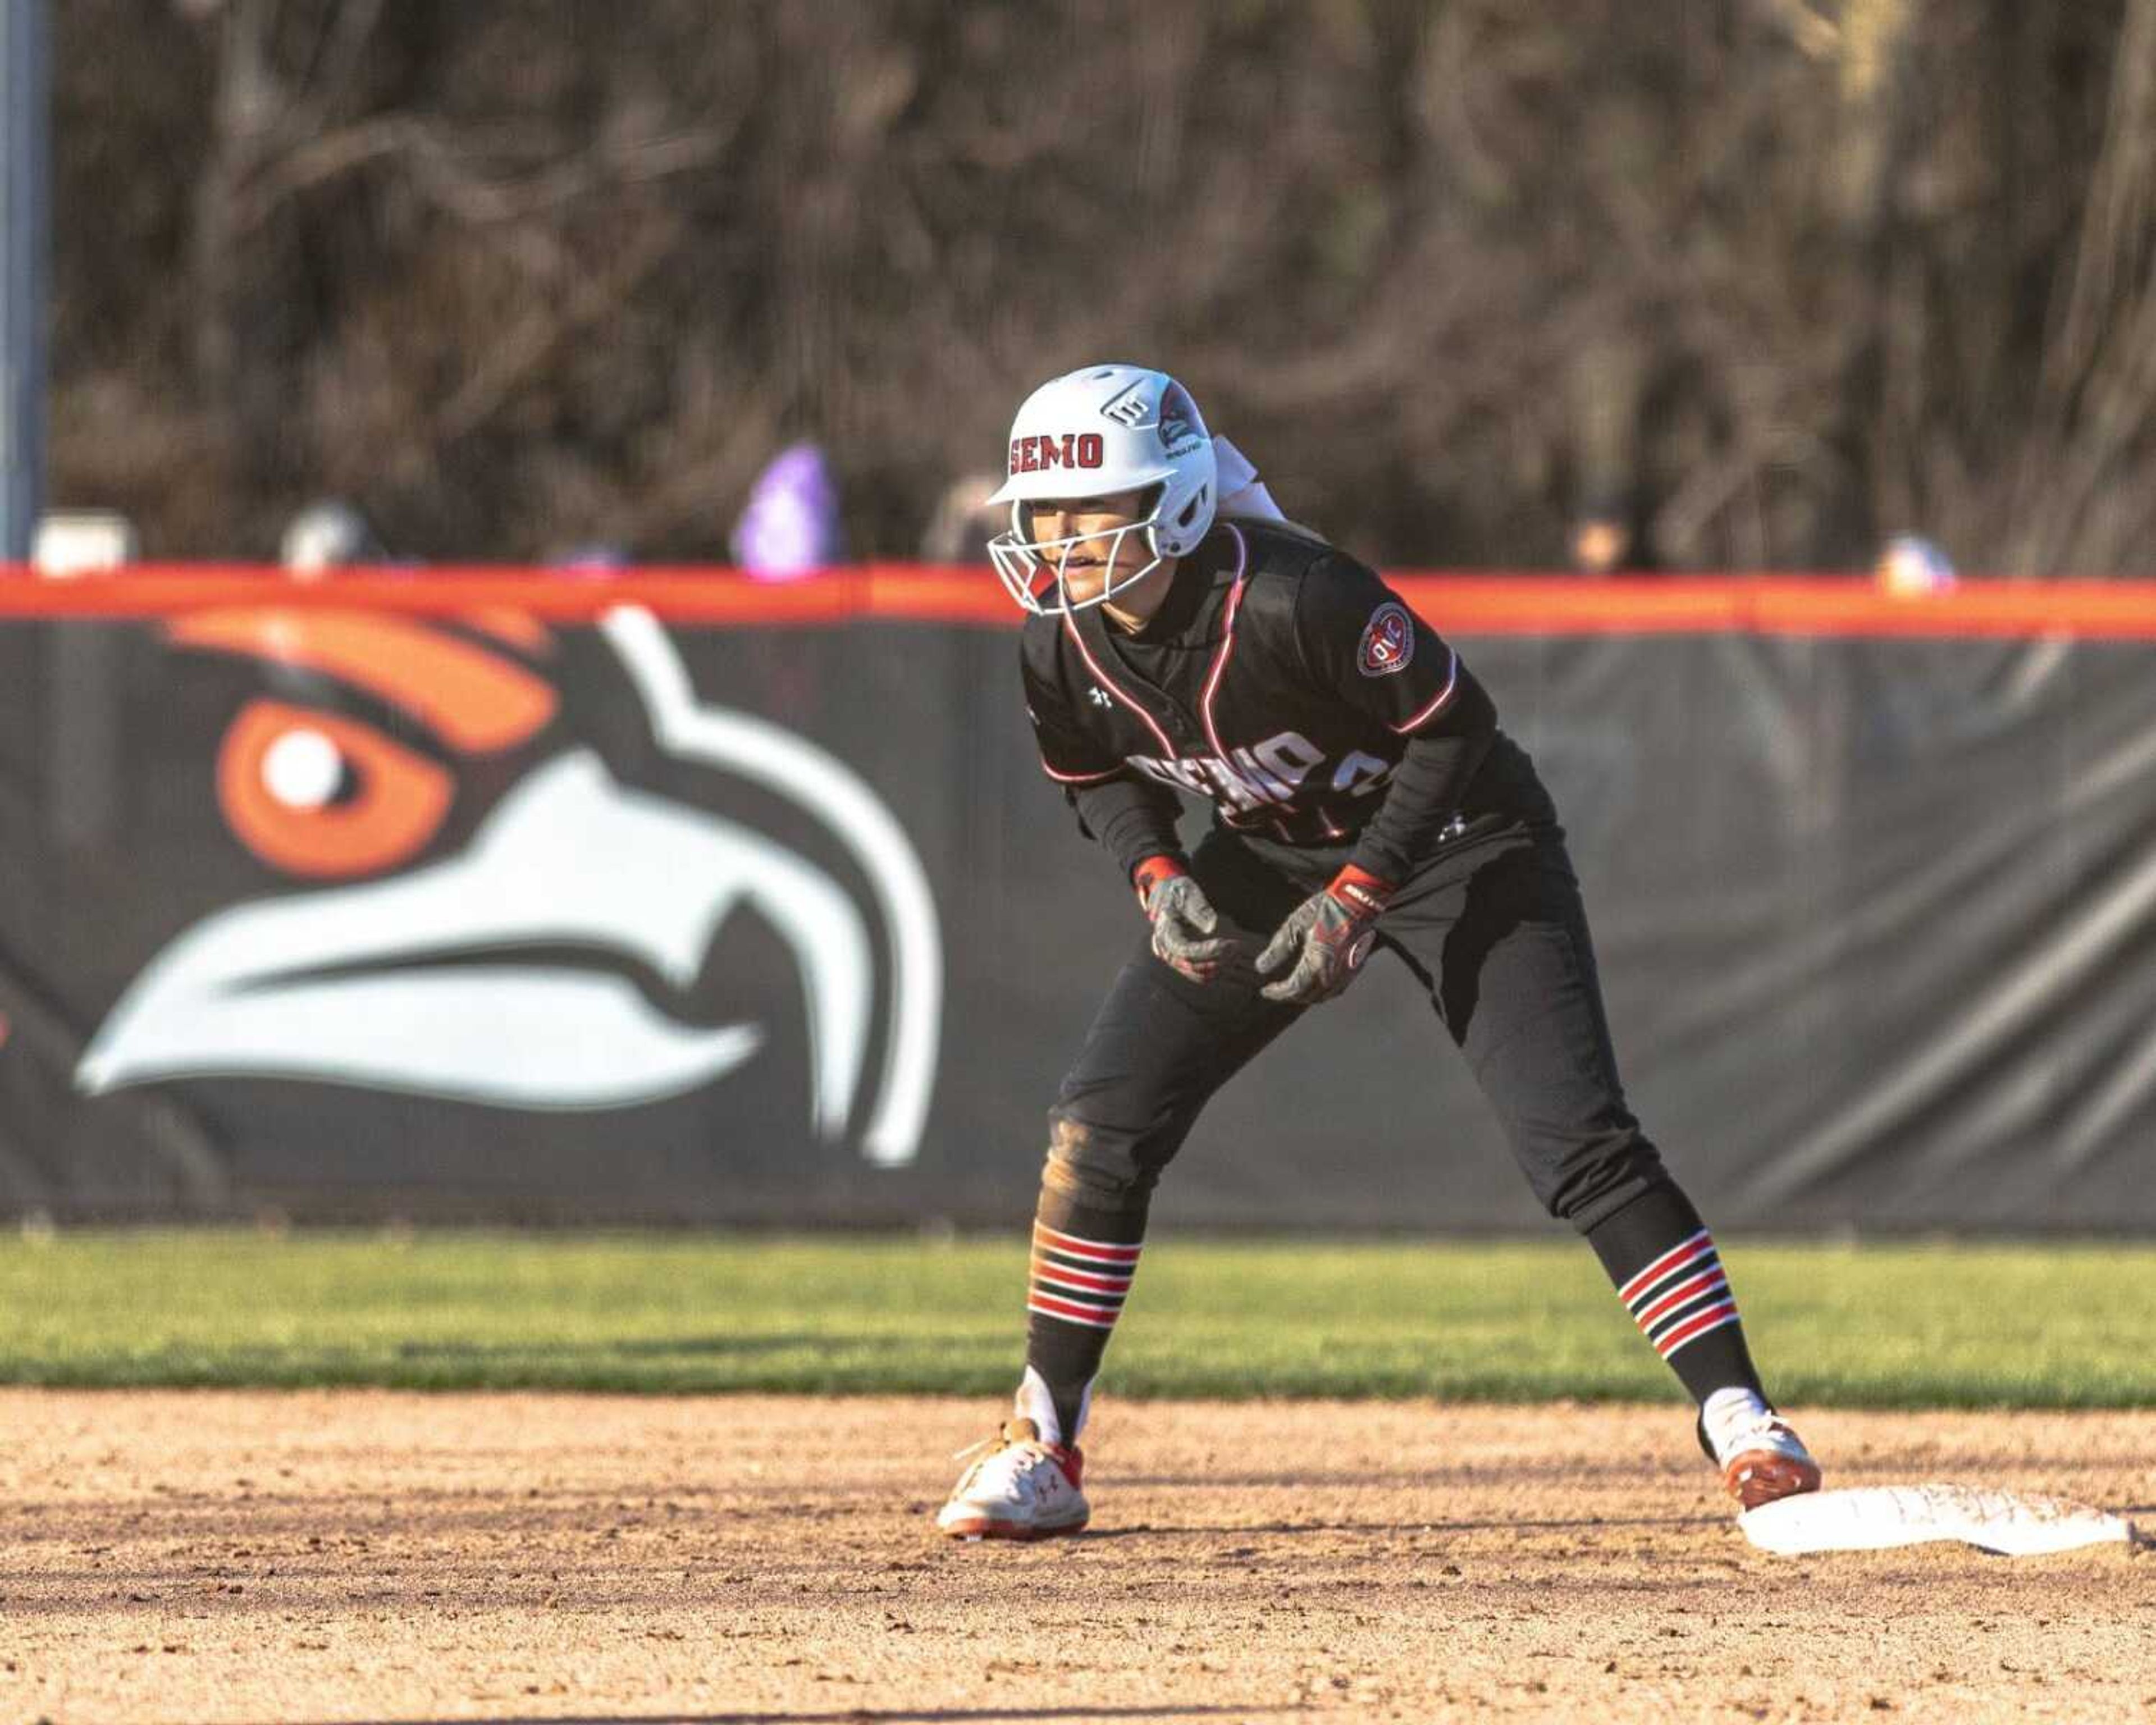 Senior Rachel Anderson watching the pitchers next move on second base in the Redhawks home opener win against UMKC on Feb. 29, 2020.